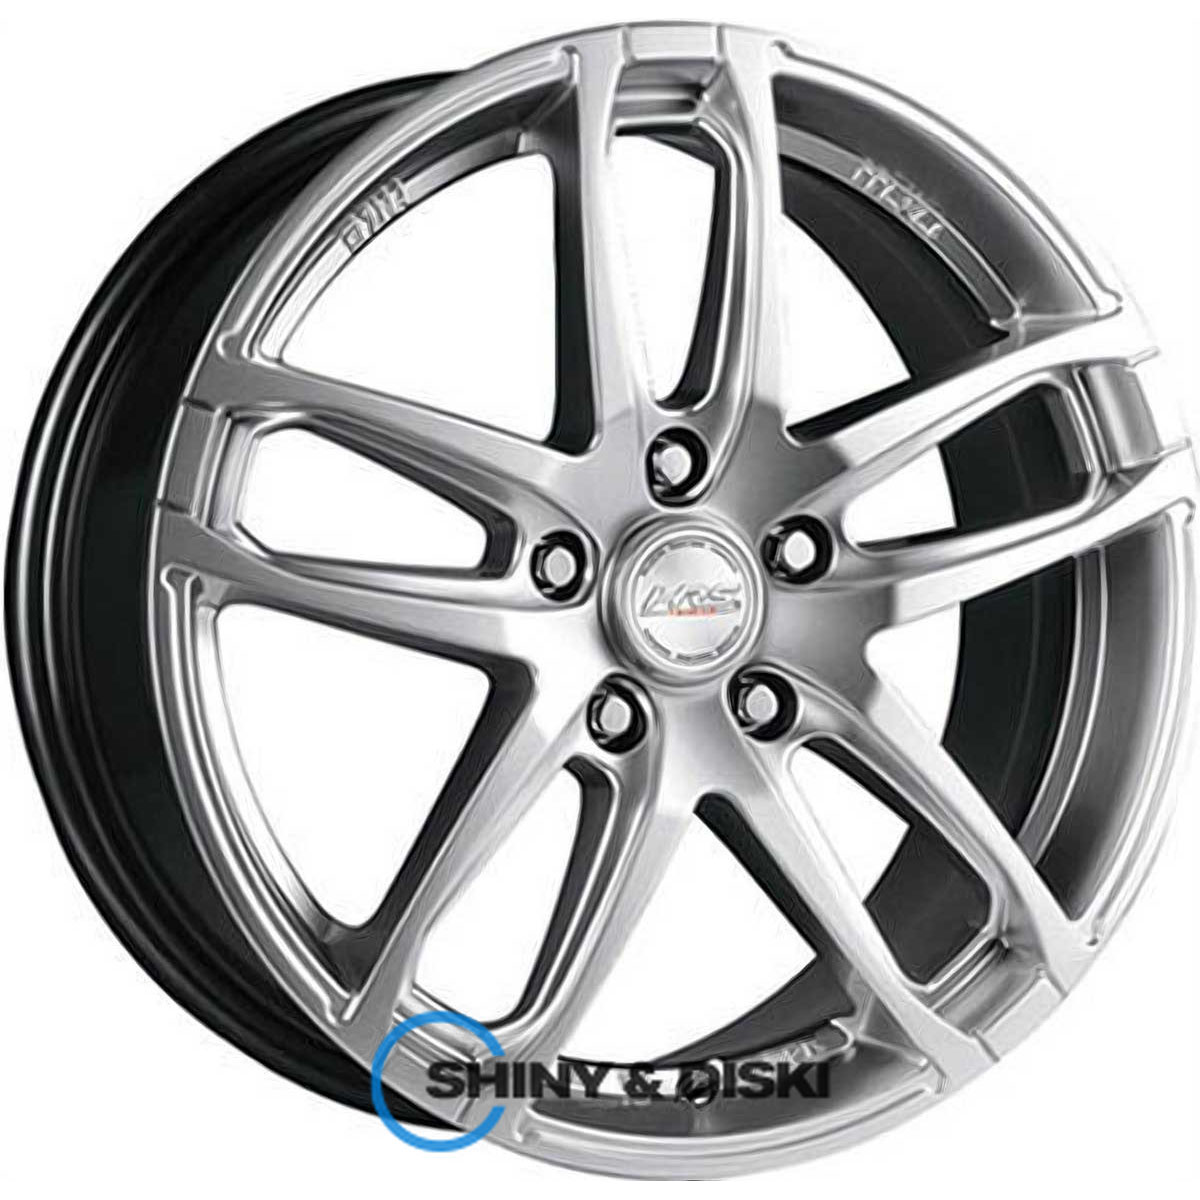 rs tuning h-495 ddnfp r16 w7 pcd5x114.3 et40 dia67.1